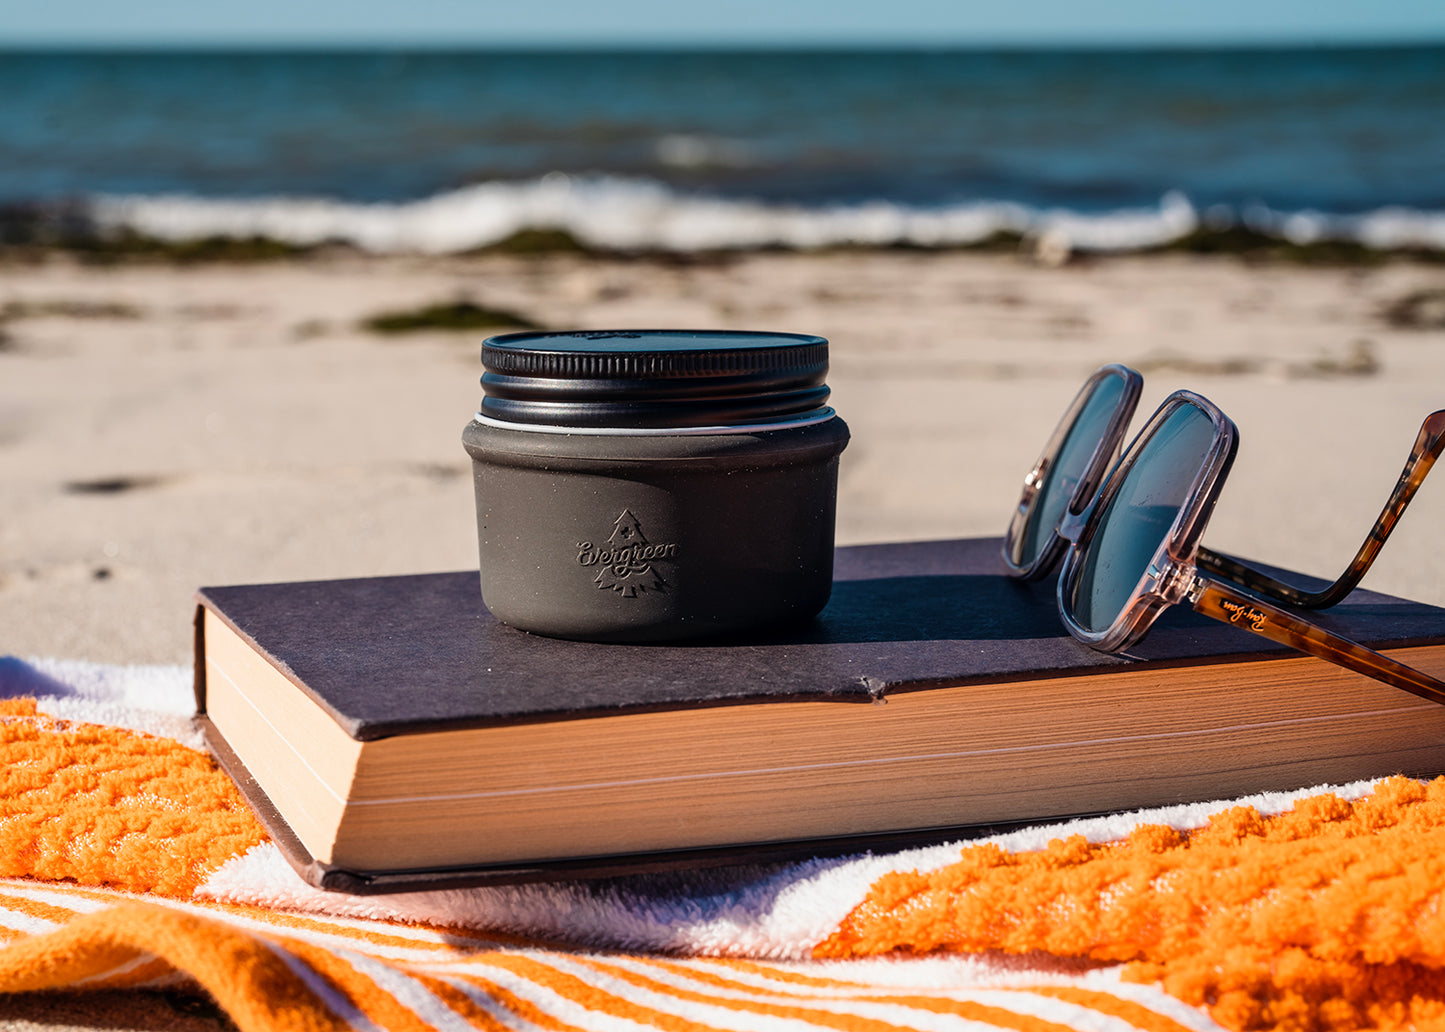 Evergreen Mini jar at the beach on top of a book